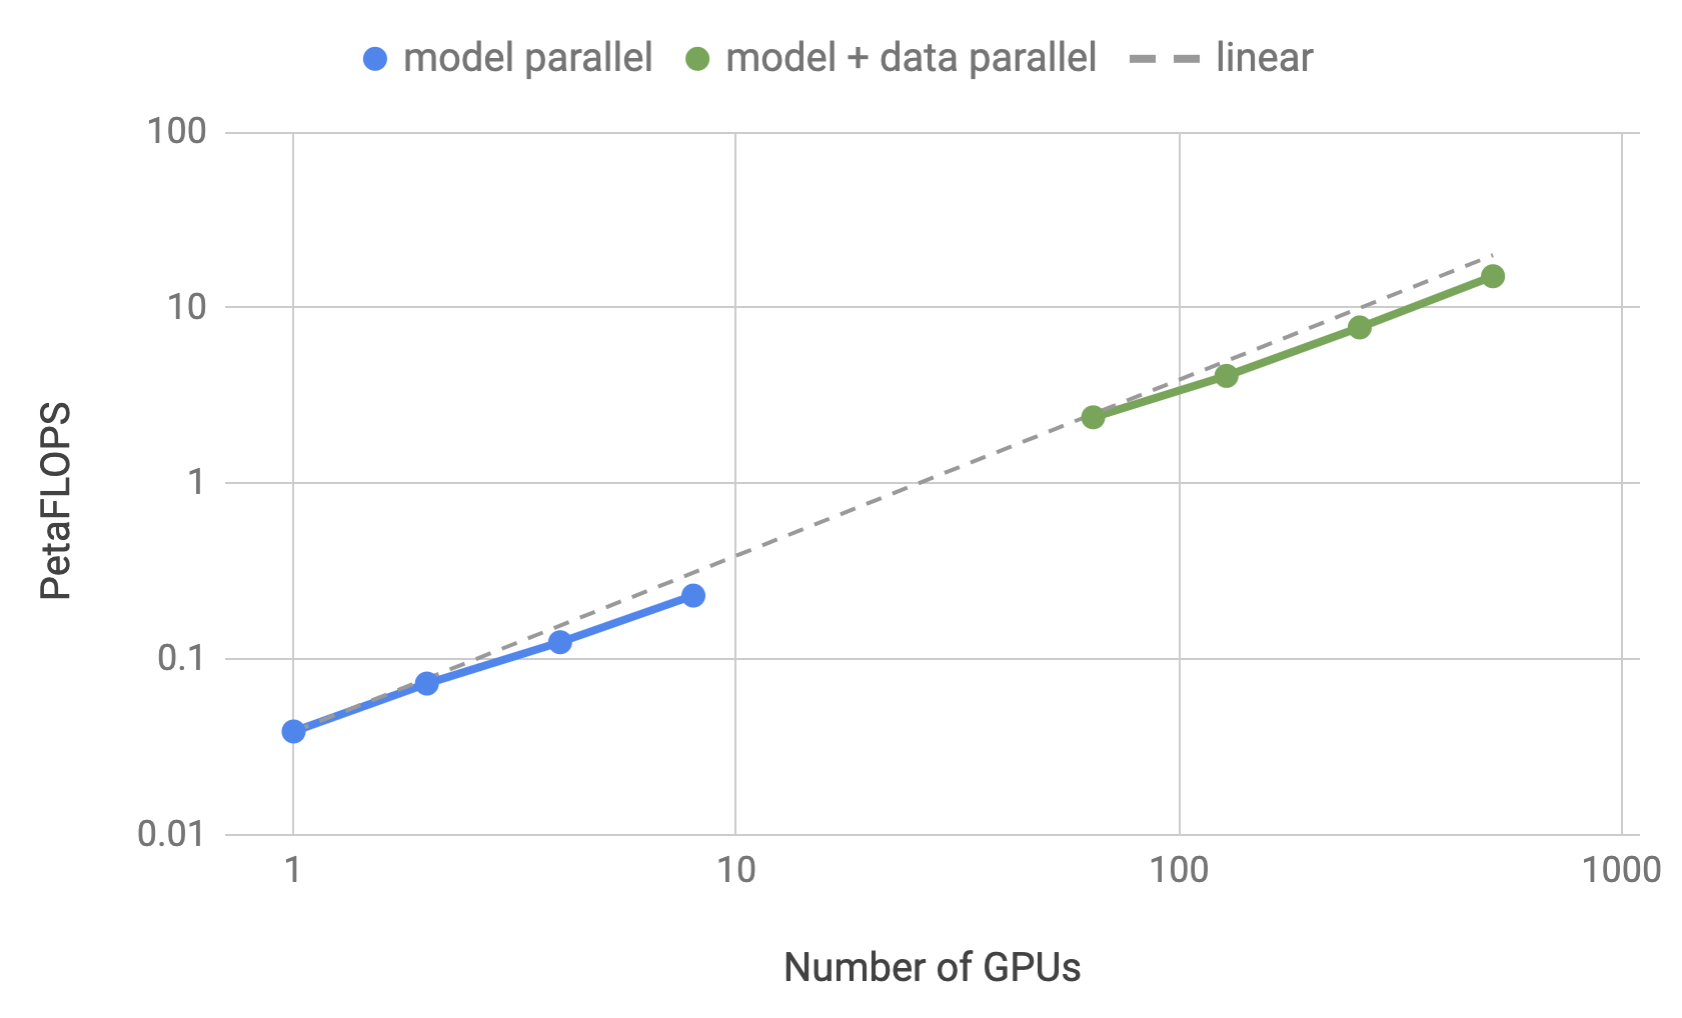 Training efficiency for tensor parallelism and a combination of tensor parallelism with data parallelism as a function of the number of GPUs